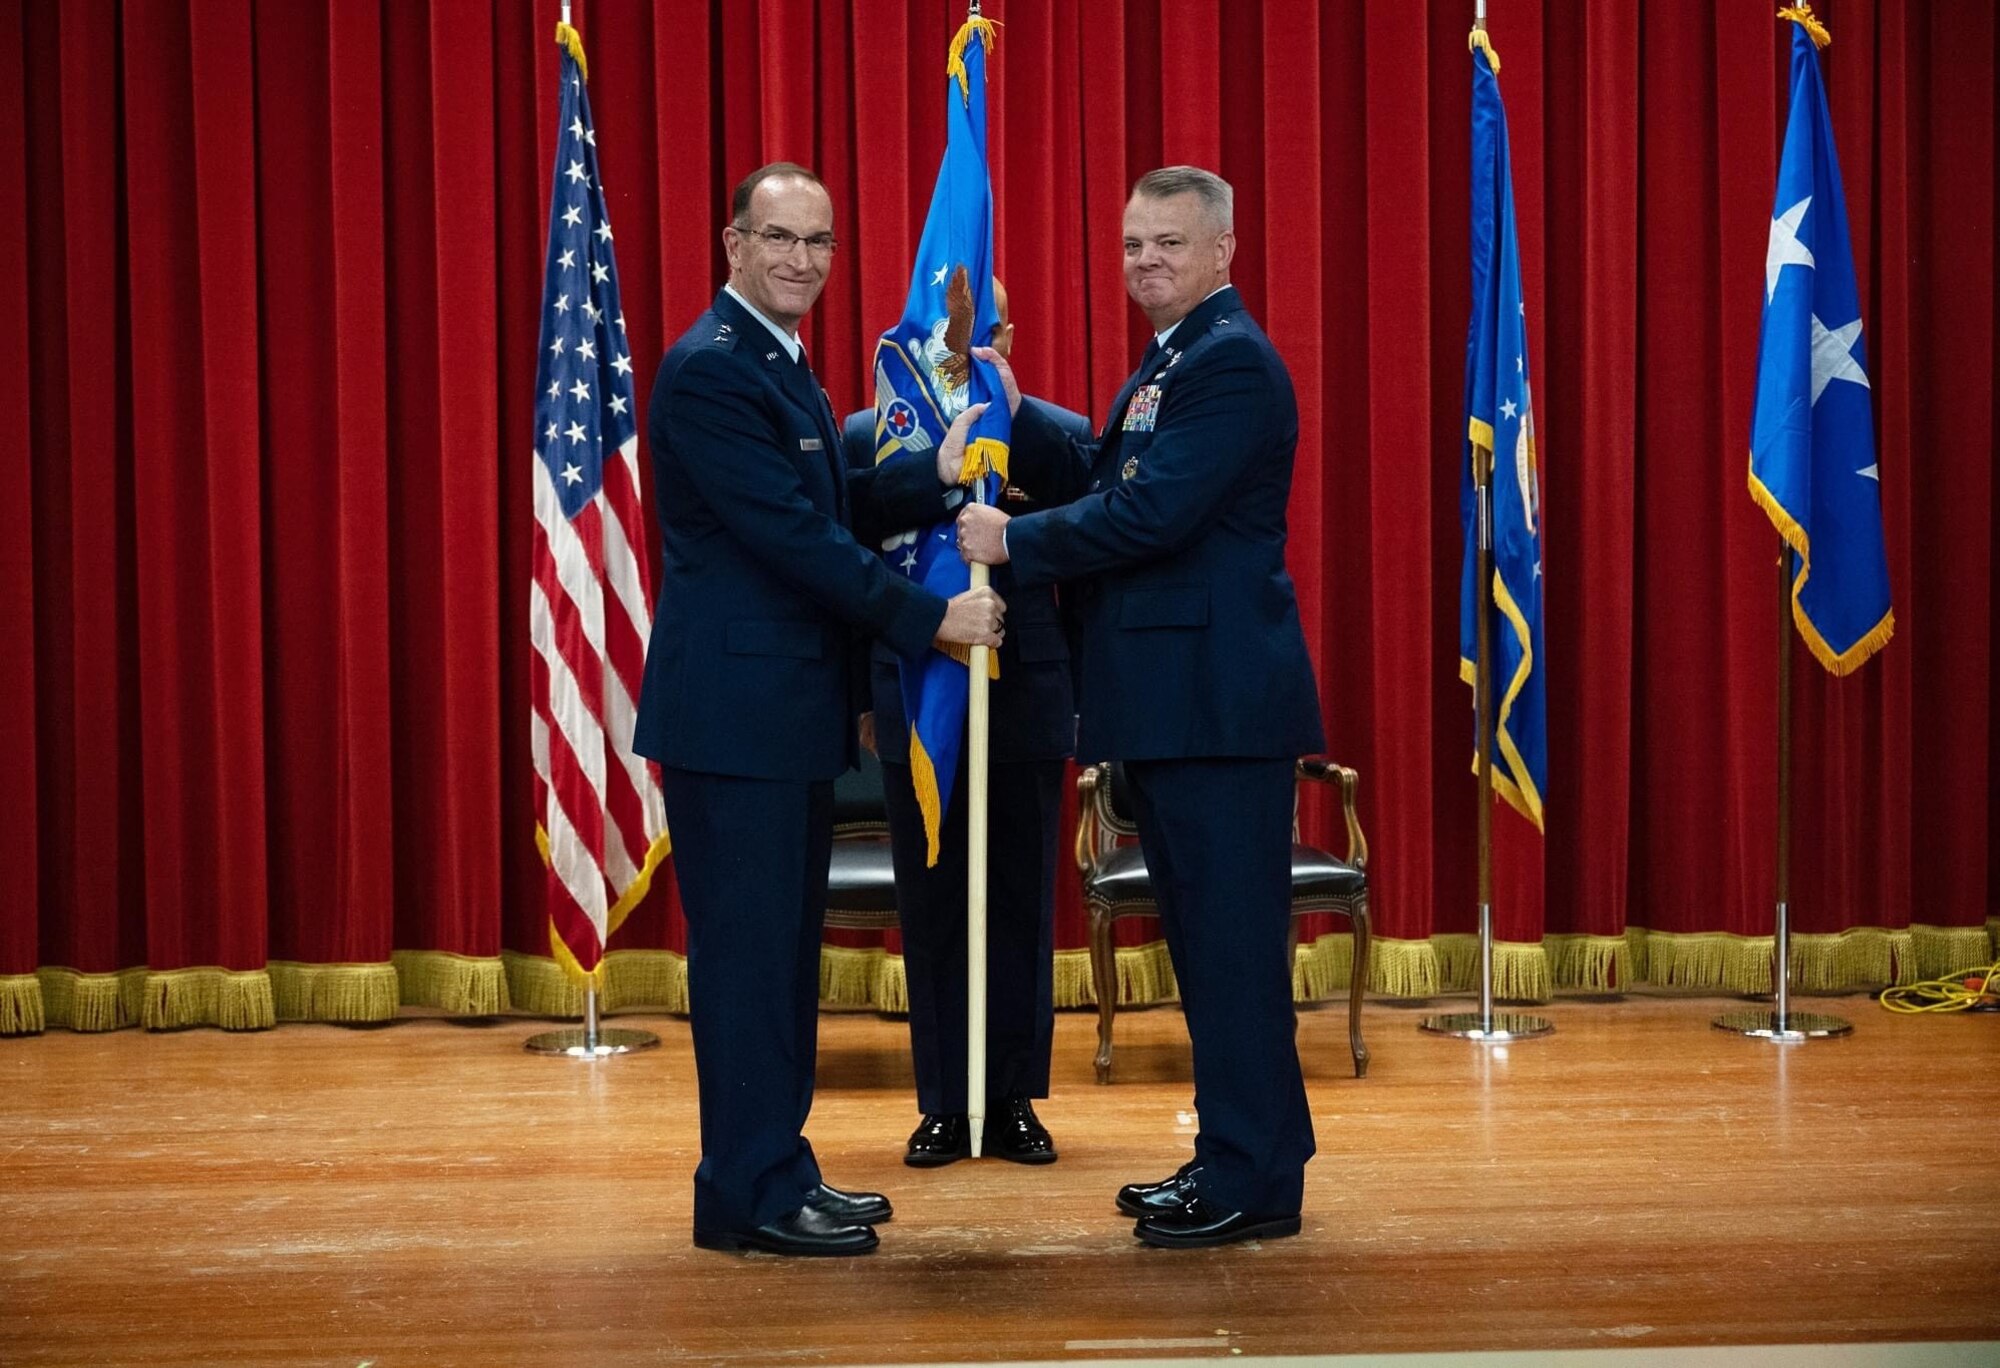 Brig. Gen. Derin S. Durham accepts the Fourth Air Force flag from Lt. Gen. John Healy, Air Force Reserve Command commander and chief of the Air Force Reserve, during an assumption of command ceremony at March Air Reserve Base, California, September 10.